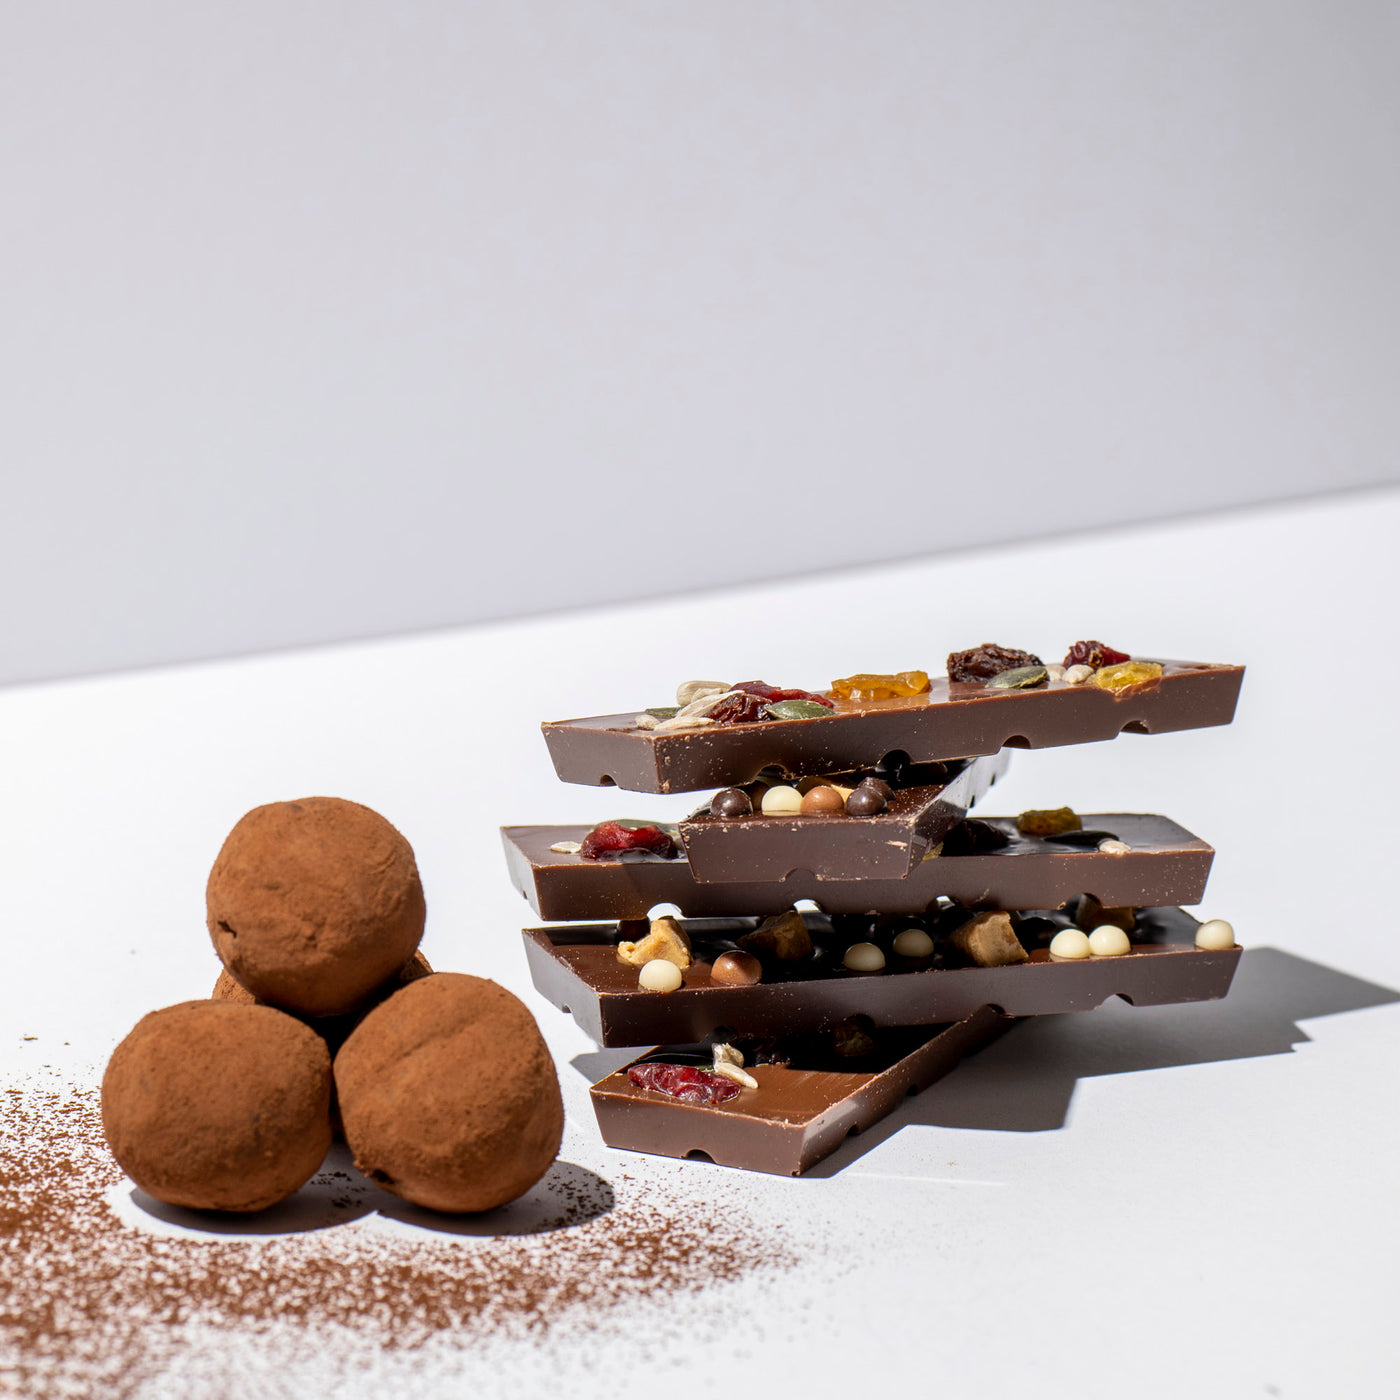 Private Chocolate Masterclass - up to 8 Adults